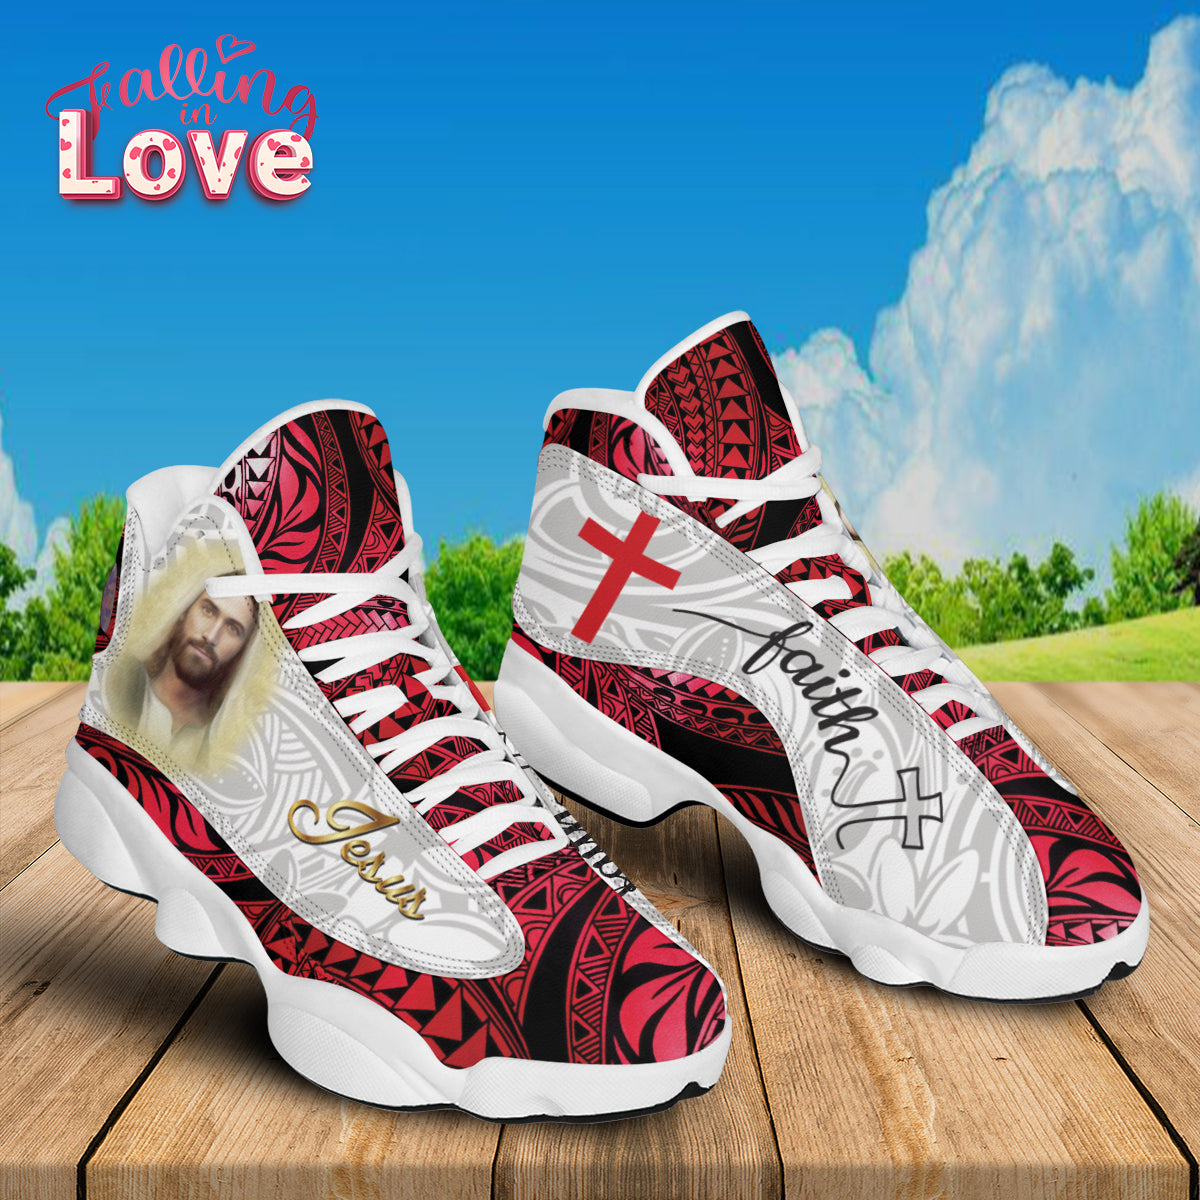 Jesus Faith Portrait Art Basketball Shoes With Thick Soles - Red Pattern Gift For Jesus Lovers -Christian Shoes